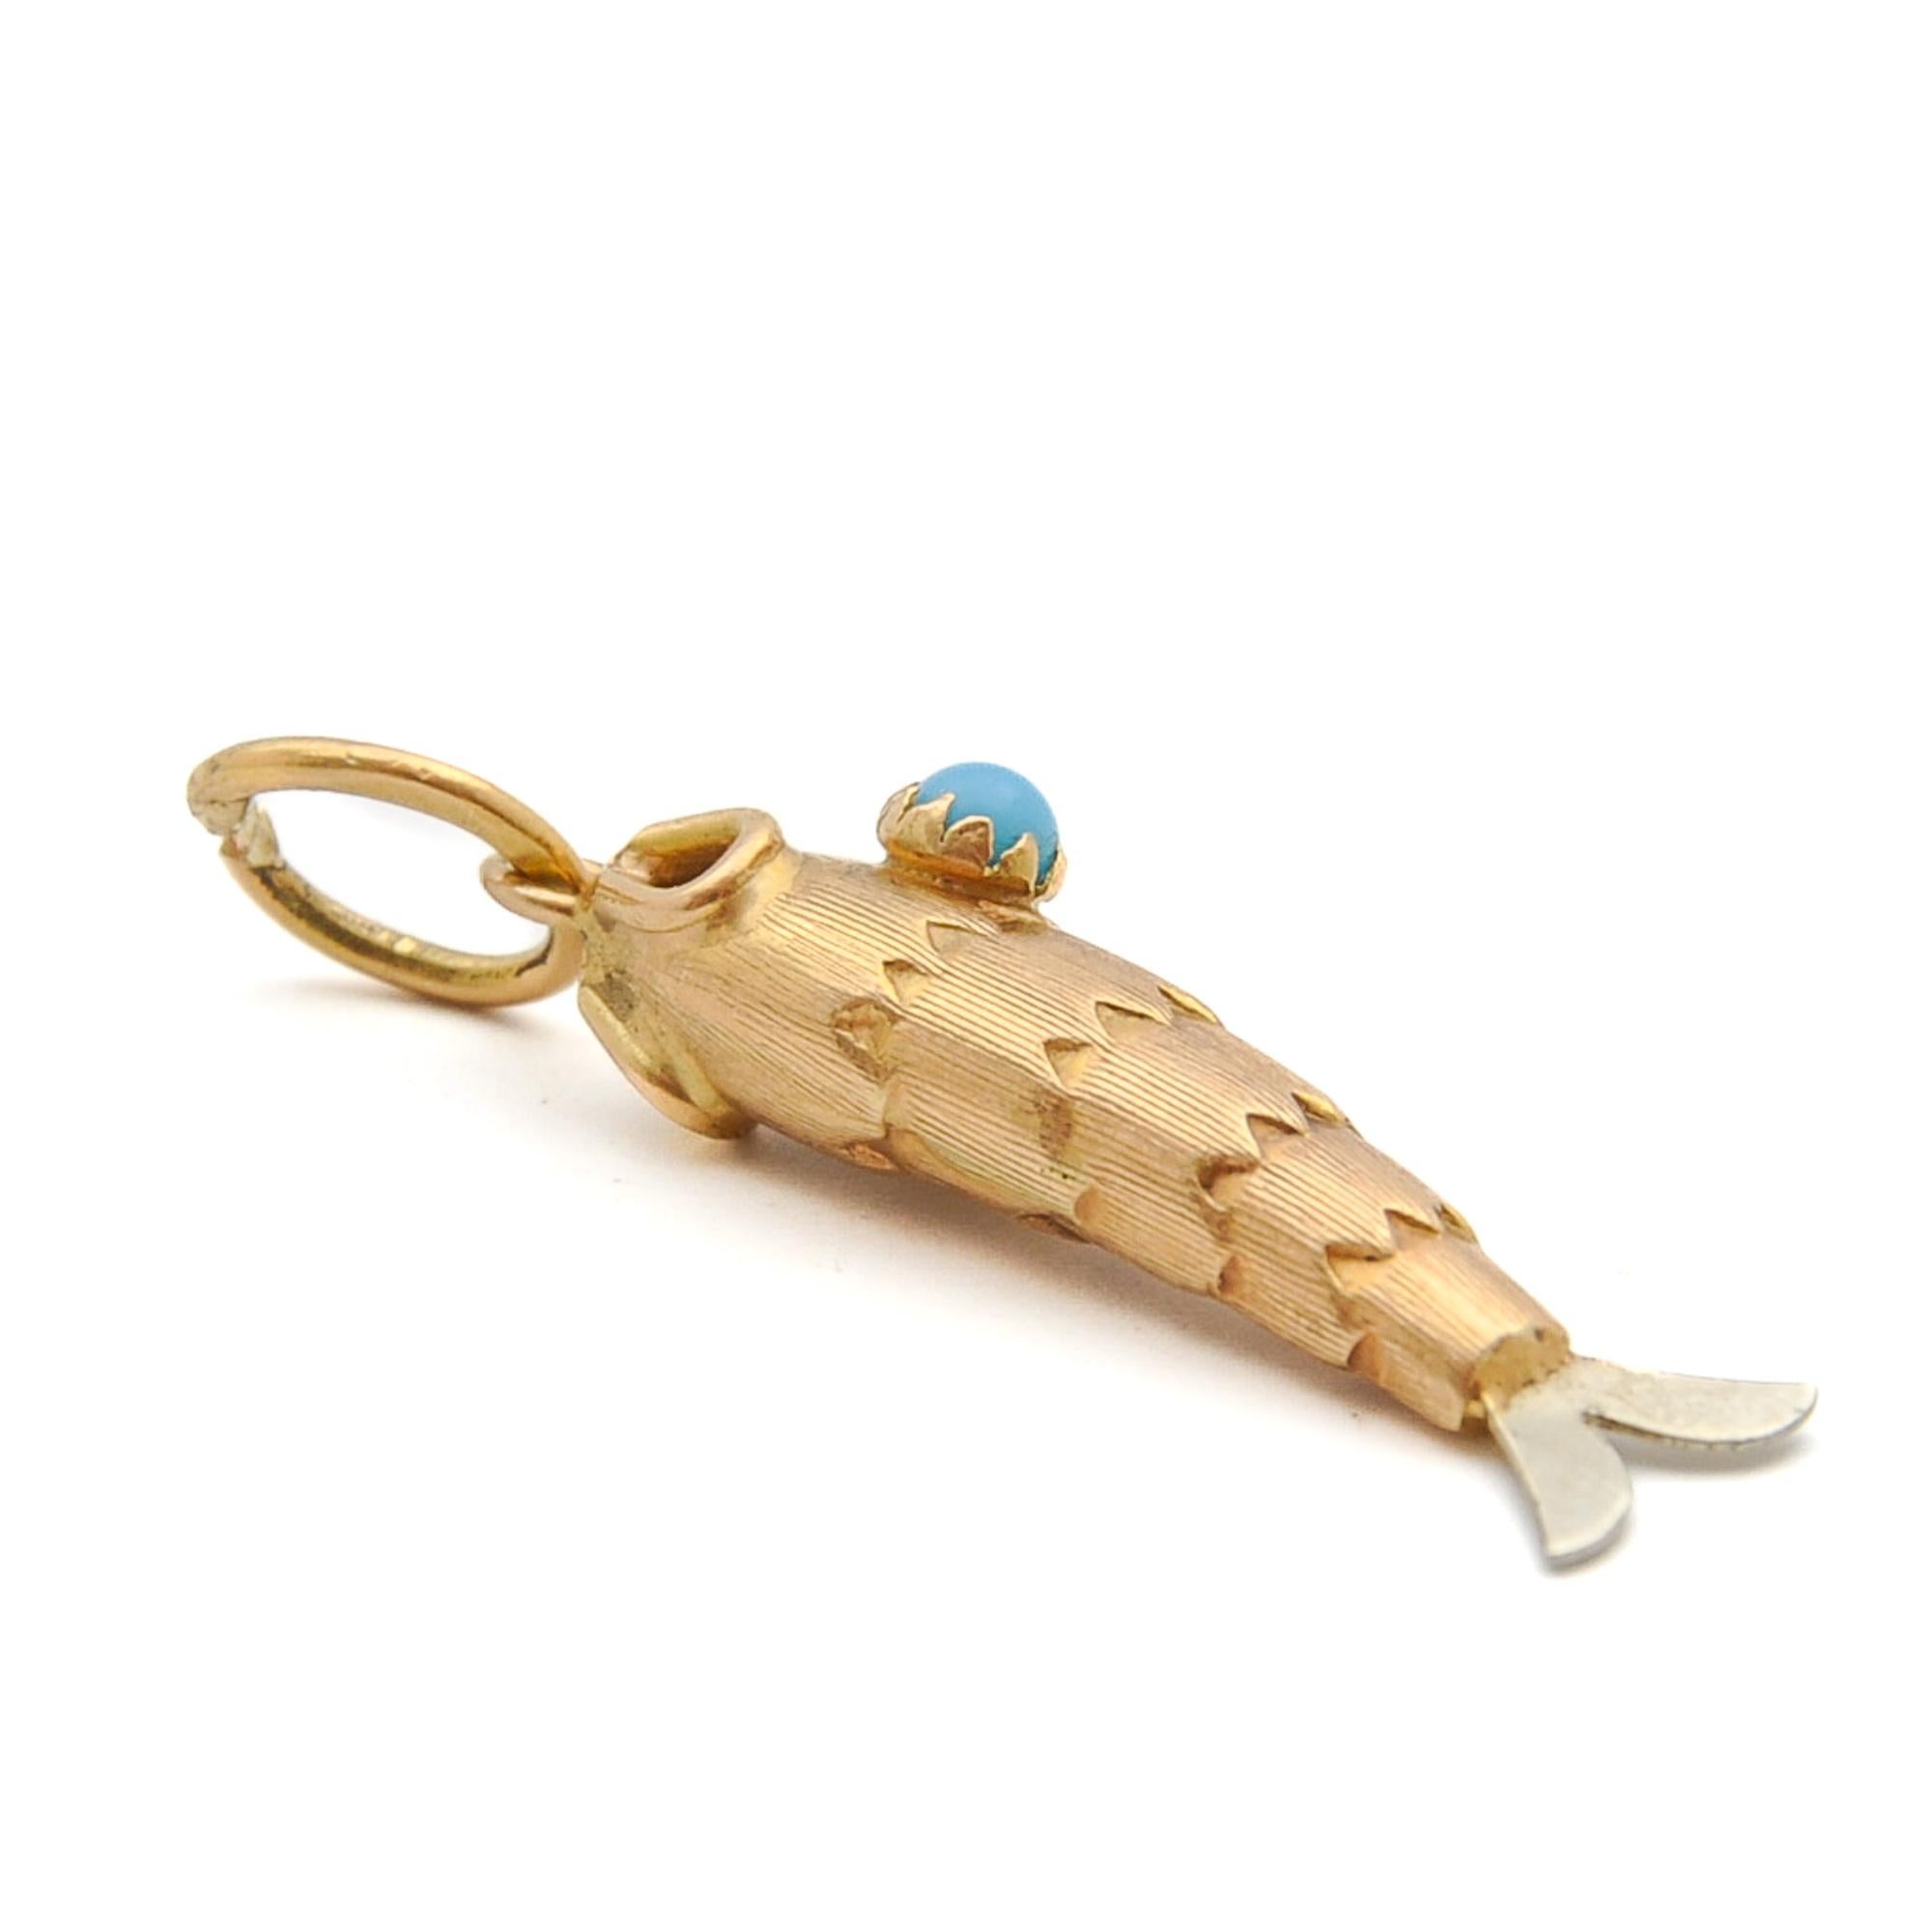 Vintage 18K Gold and Silver Turquoise Fish Charm Pendant For Sale 3